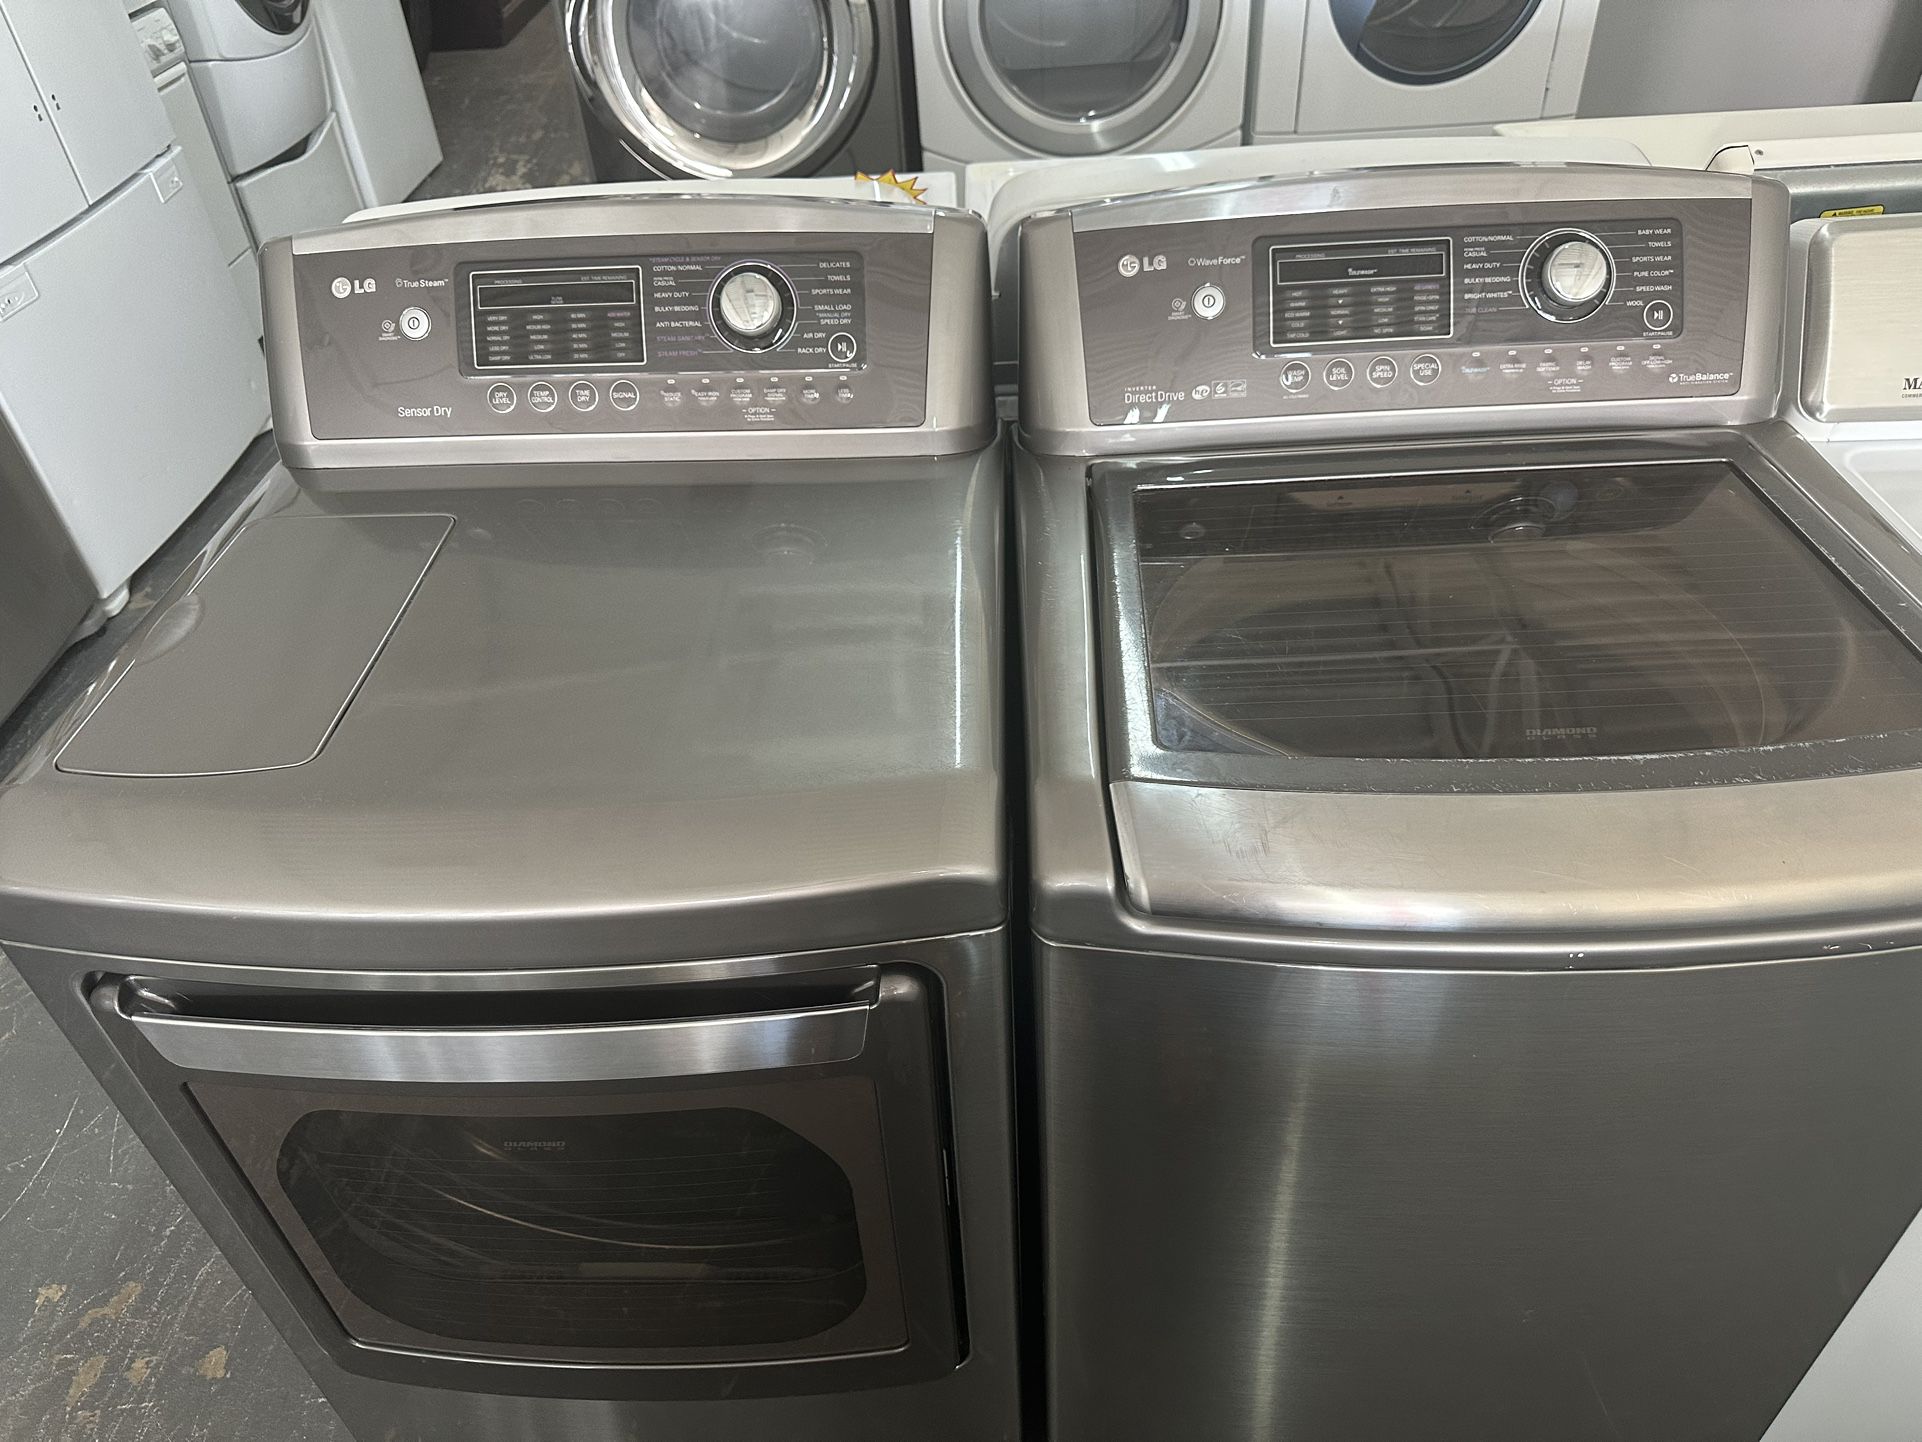 LG Washer And Dryer Sets Stainless Steel